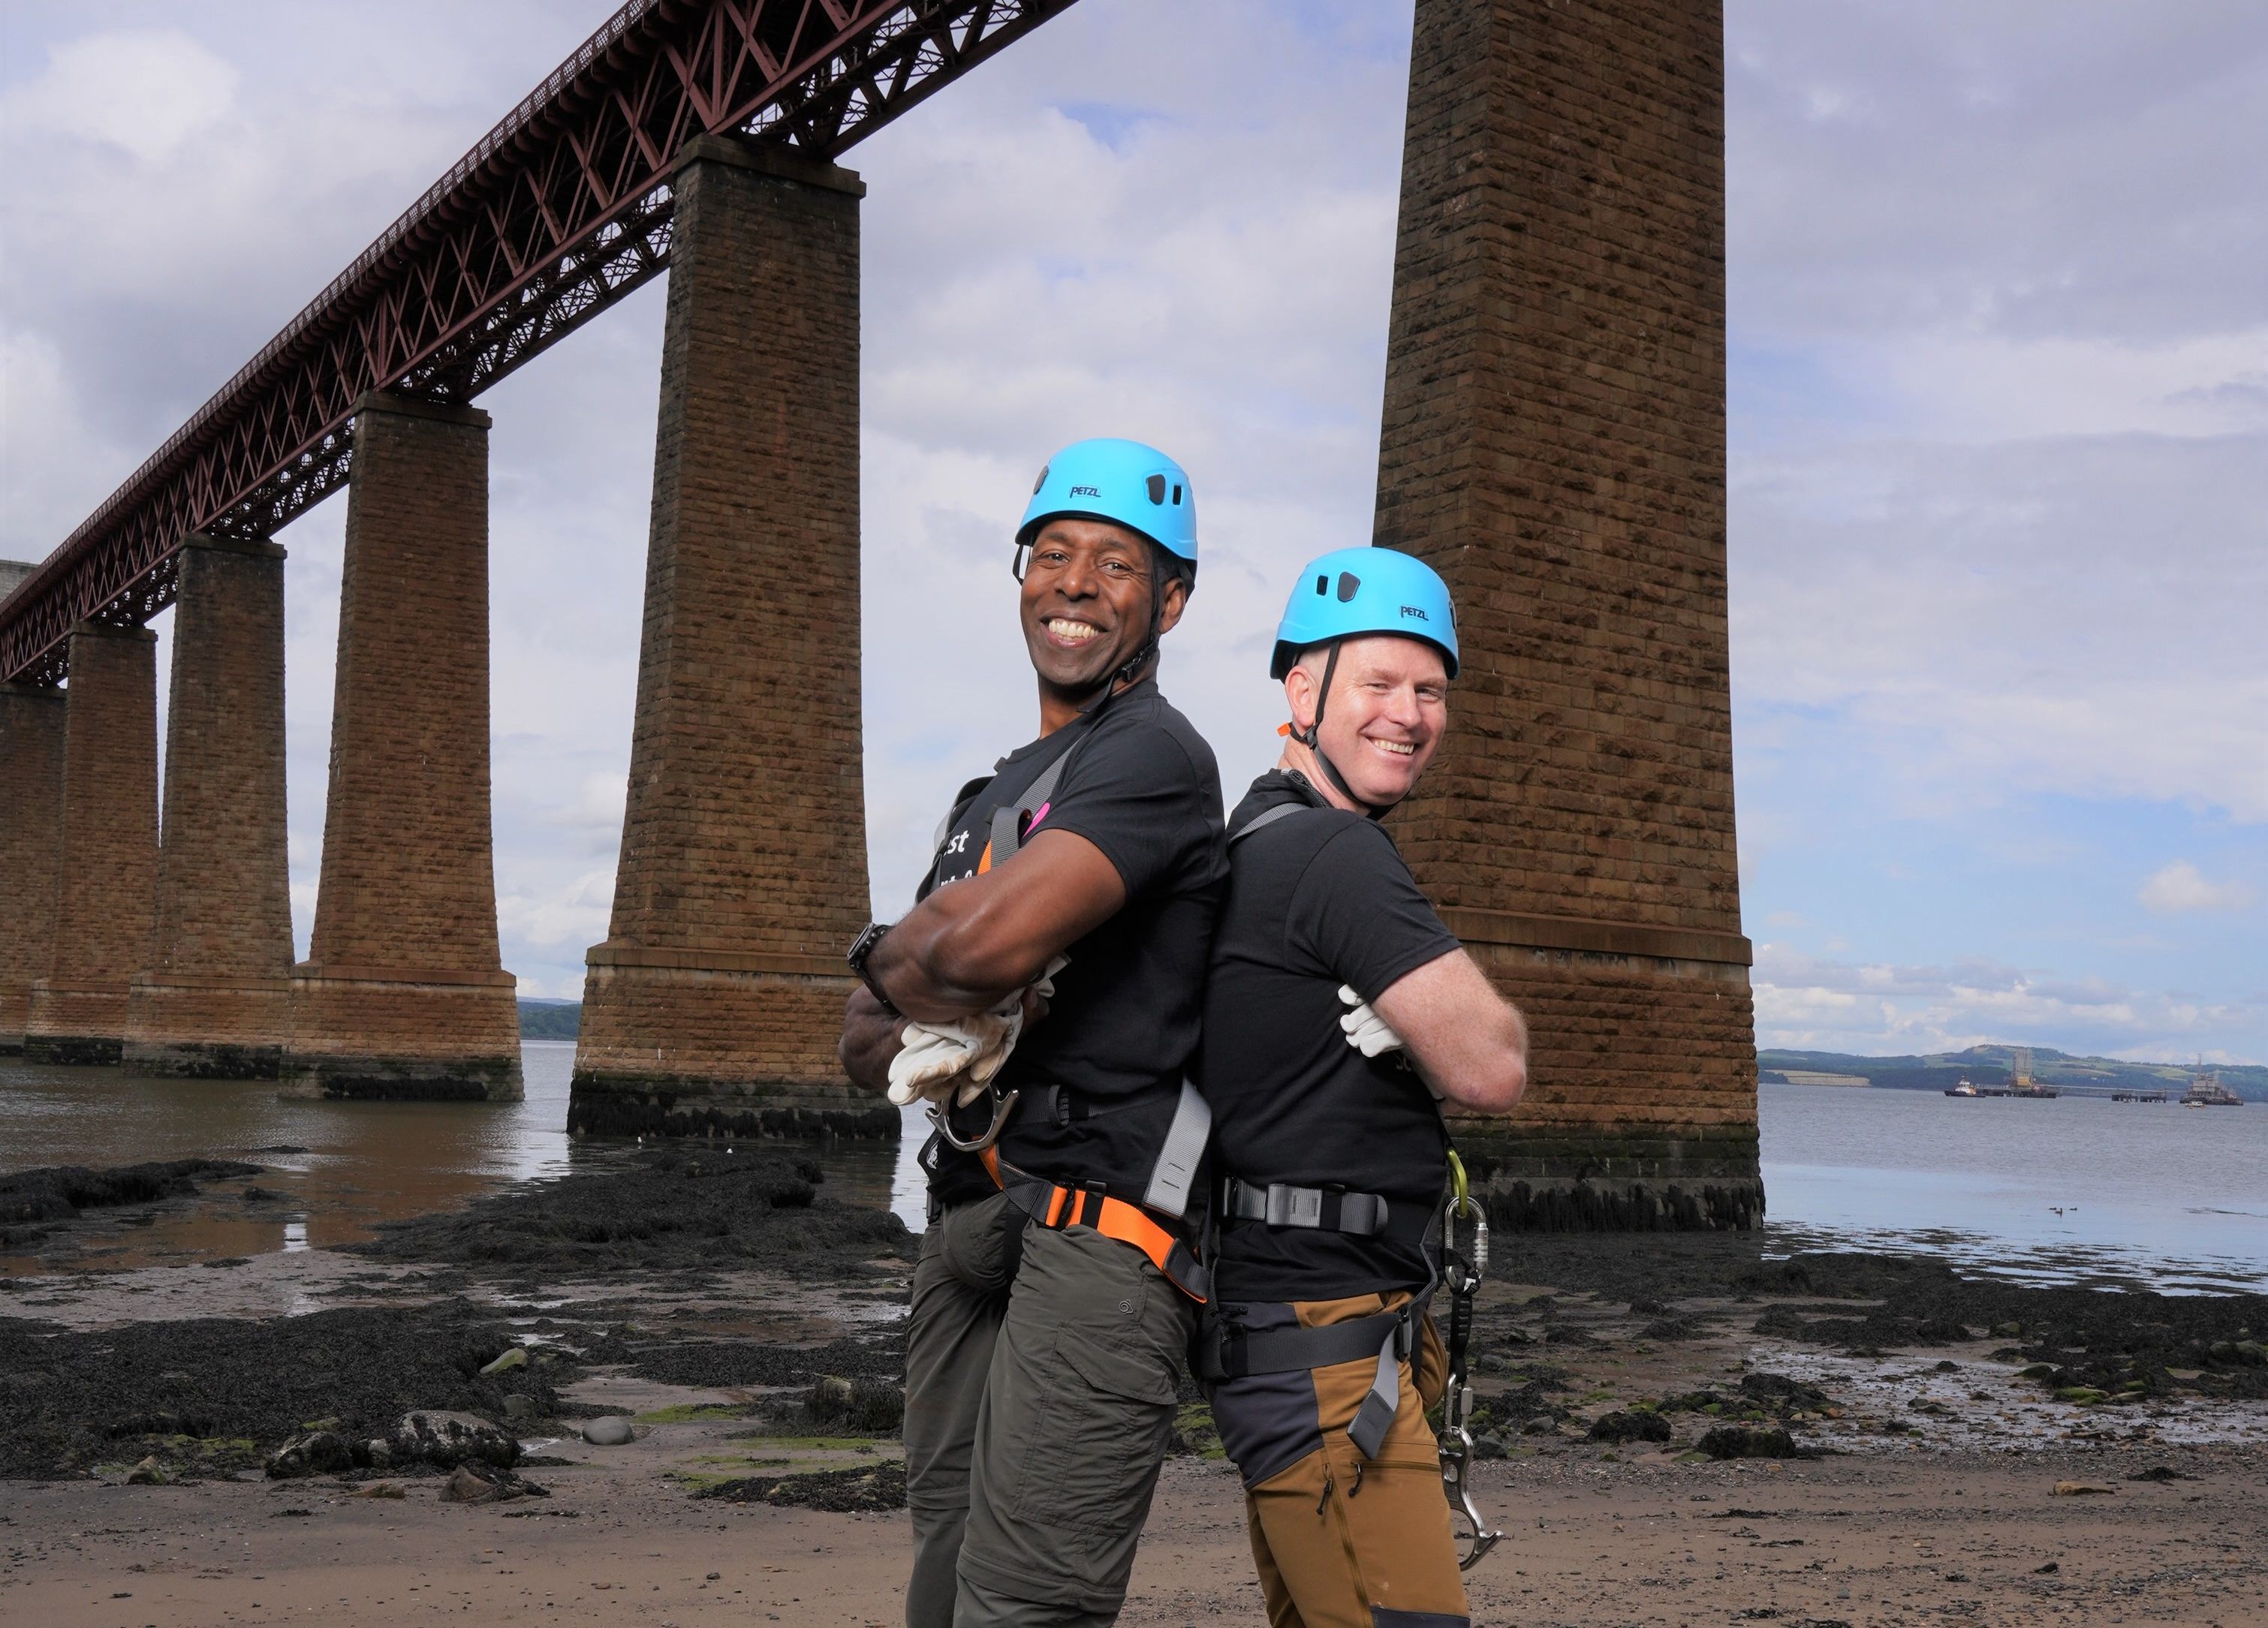 Network Rail and Balfour Beatty bring back Forth Bridge abseil with charity partner